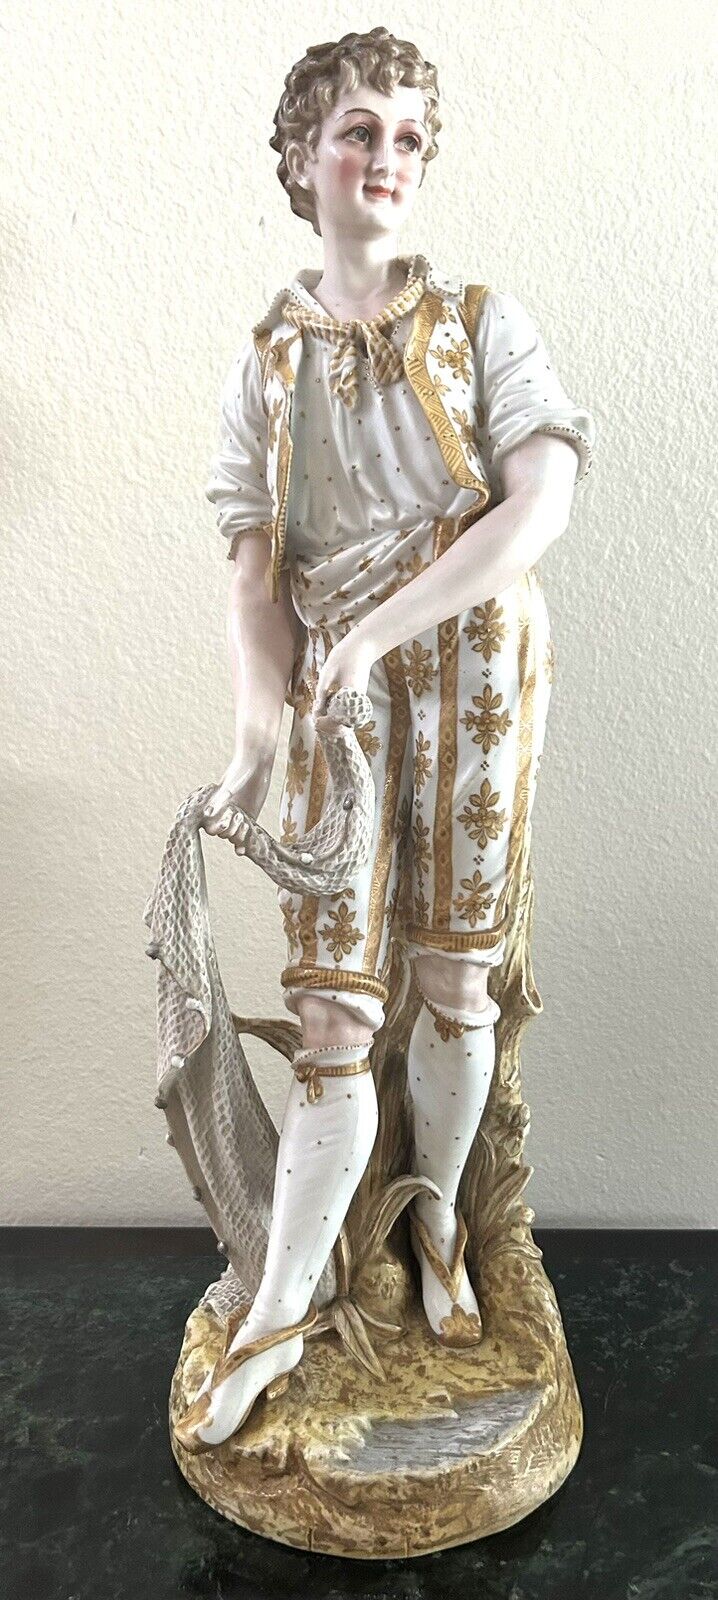 Antique Large 19th c French Bisque Porcelain Figure of Young Fisherman 20”H